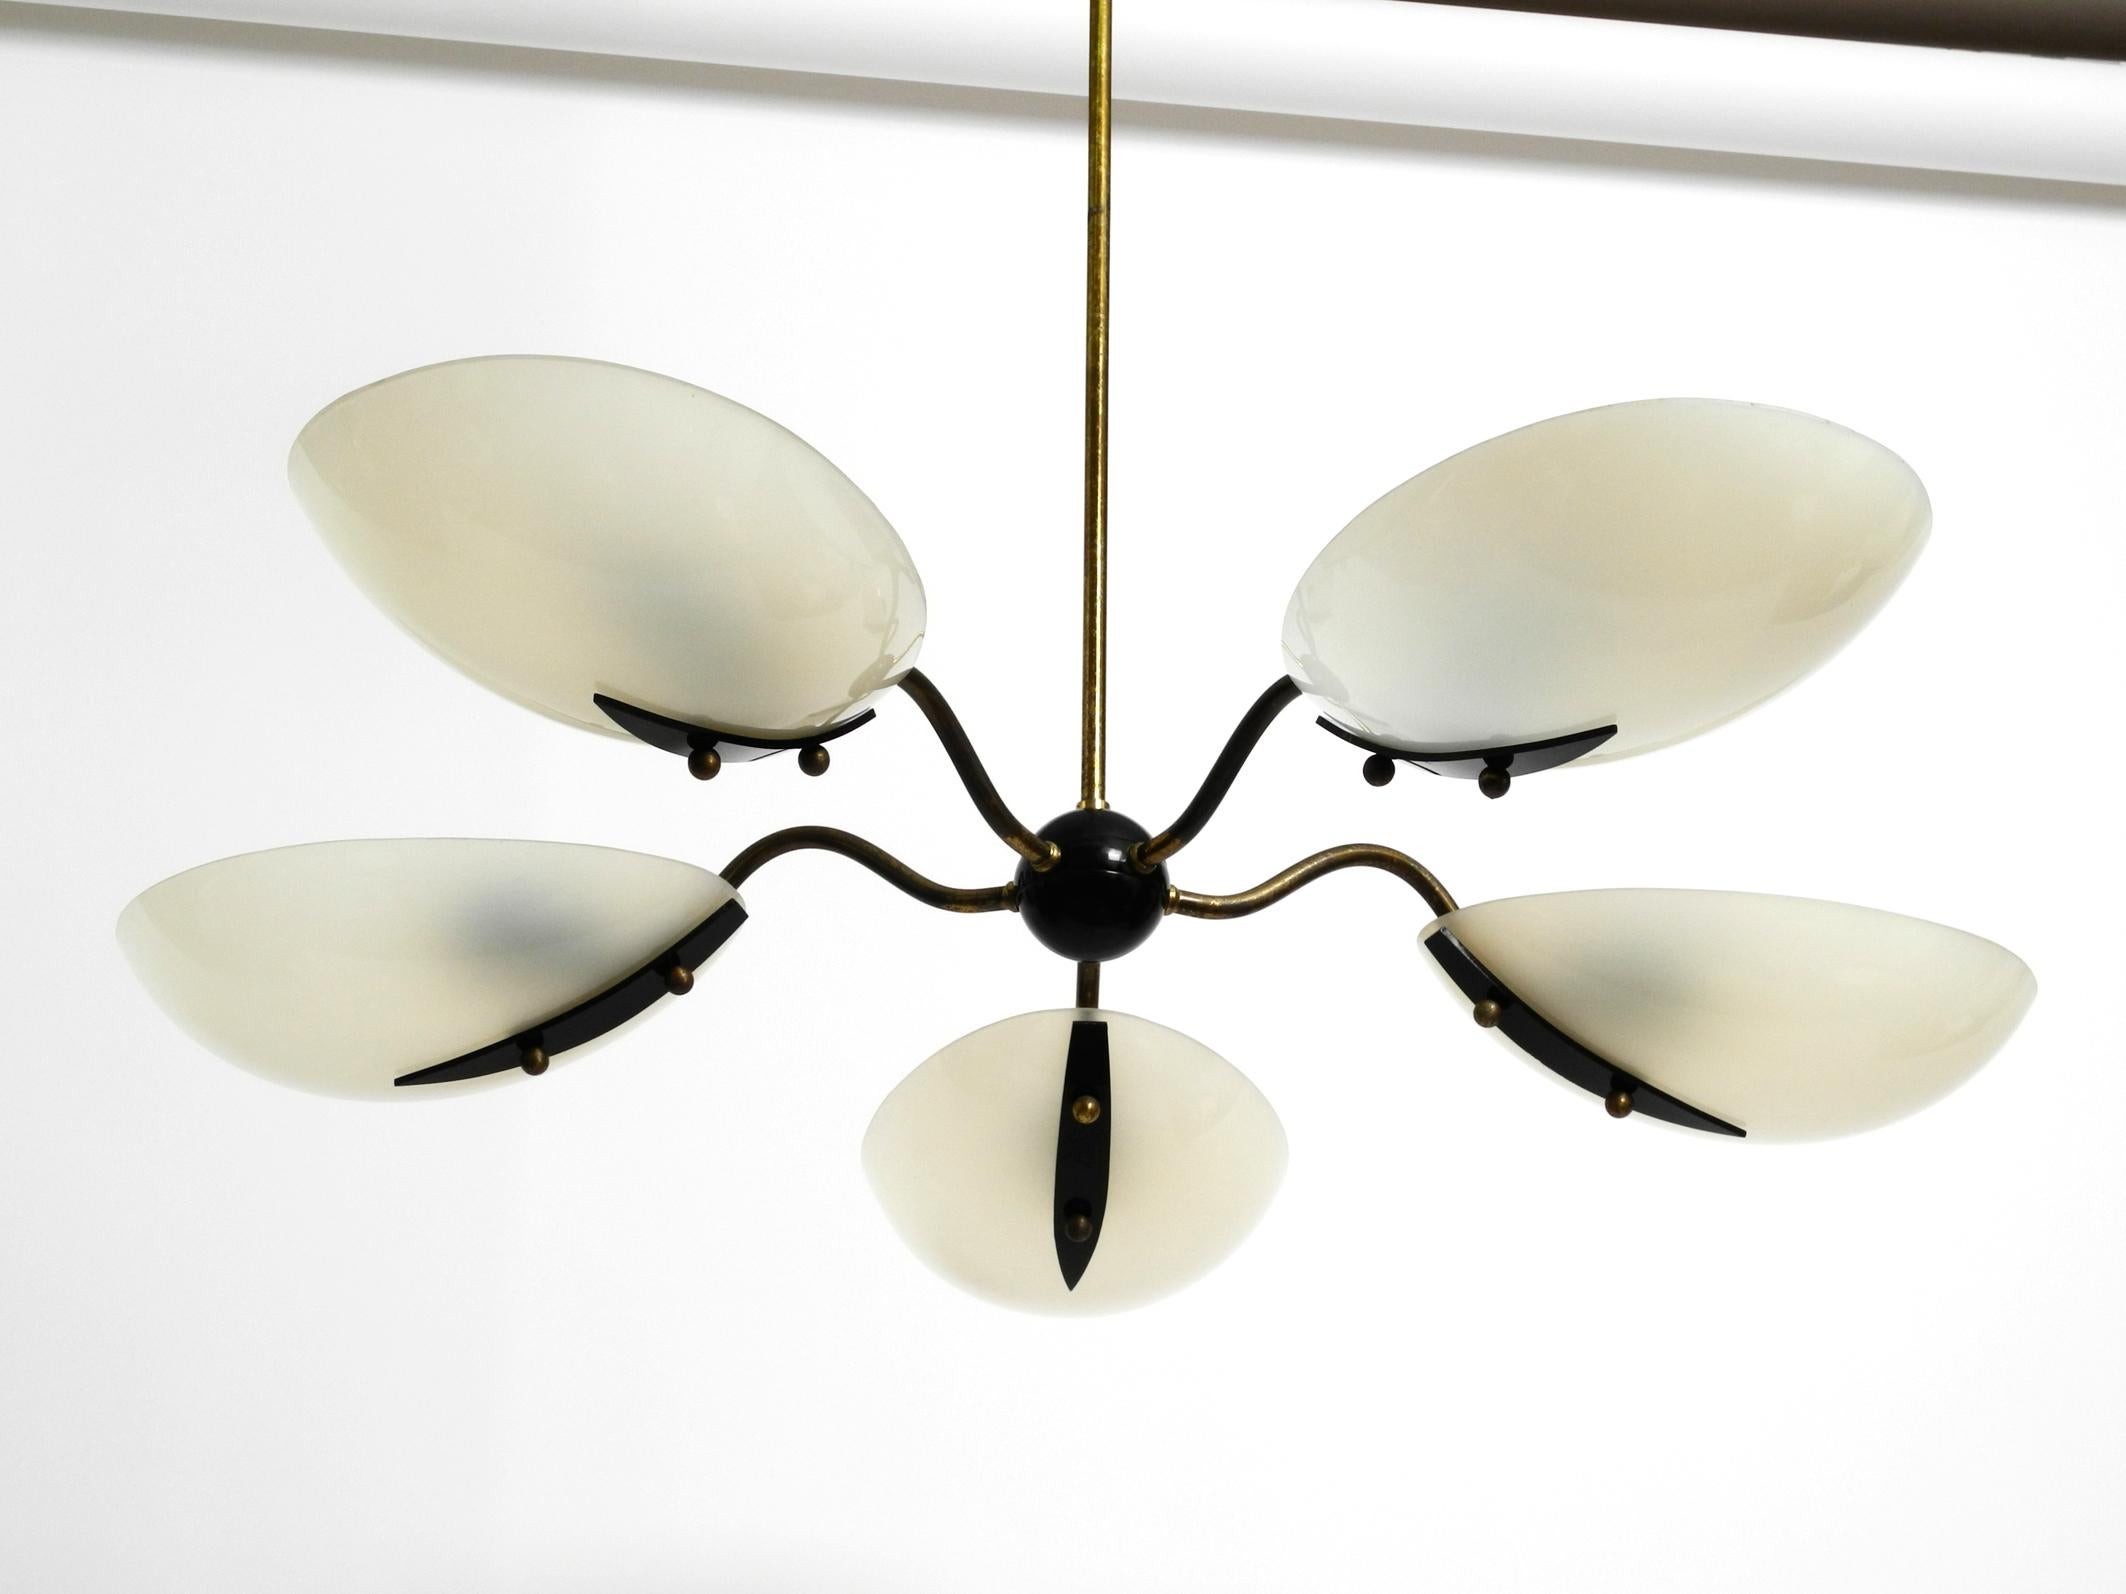 Gorgeous huge Mid-Century Modern brass chandelier with five arms 
made of brass and large plexiglass shades.
Extraordinary rare design with oval beige lampshades.
Five original brass E27 sockets for max 60W each.
100% original condition. In very